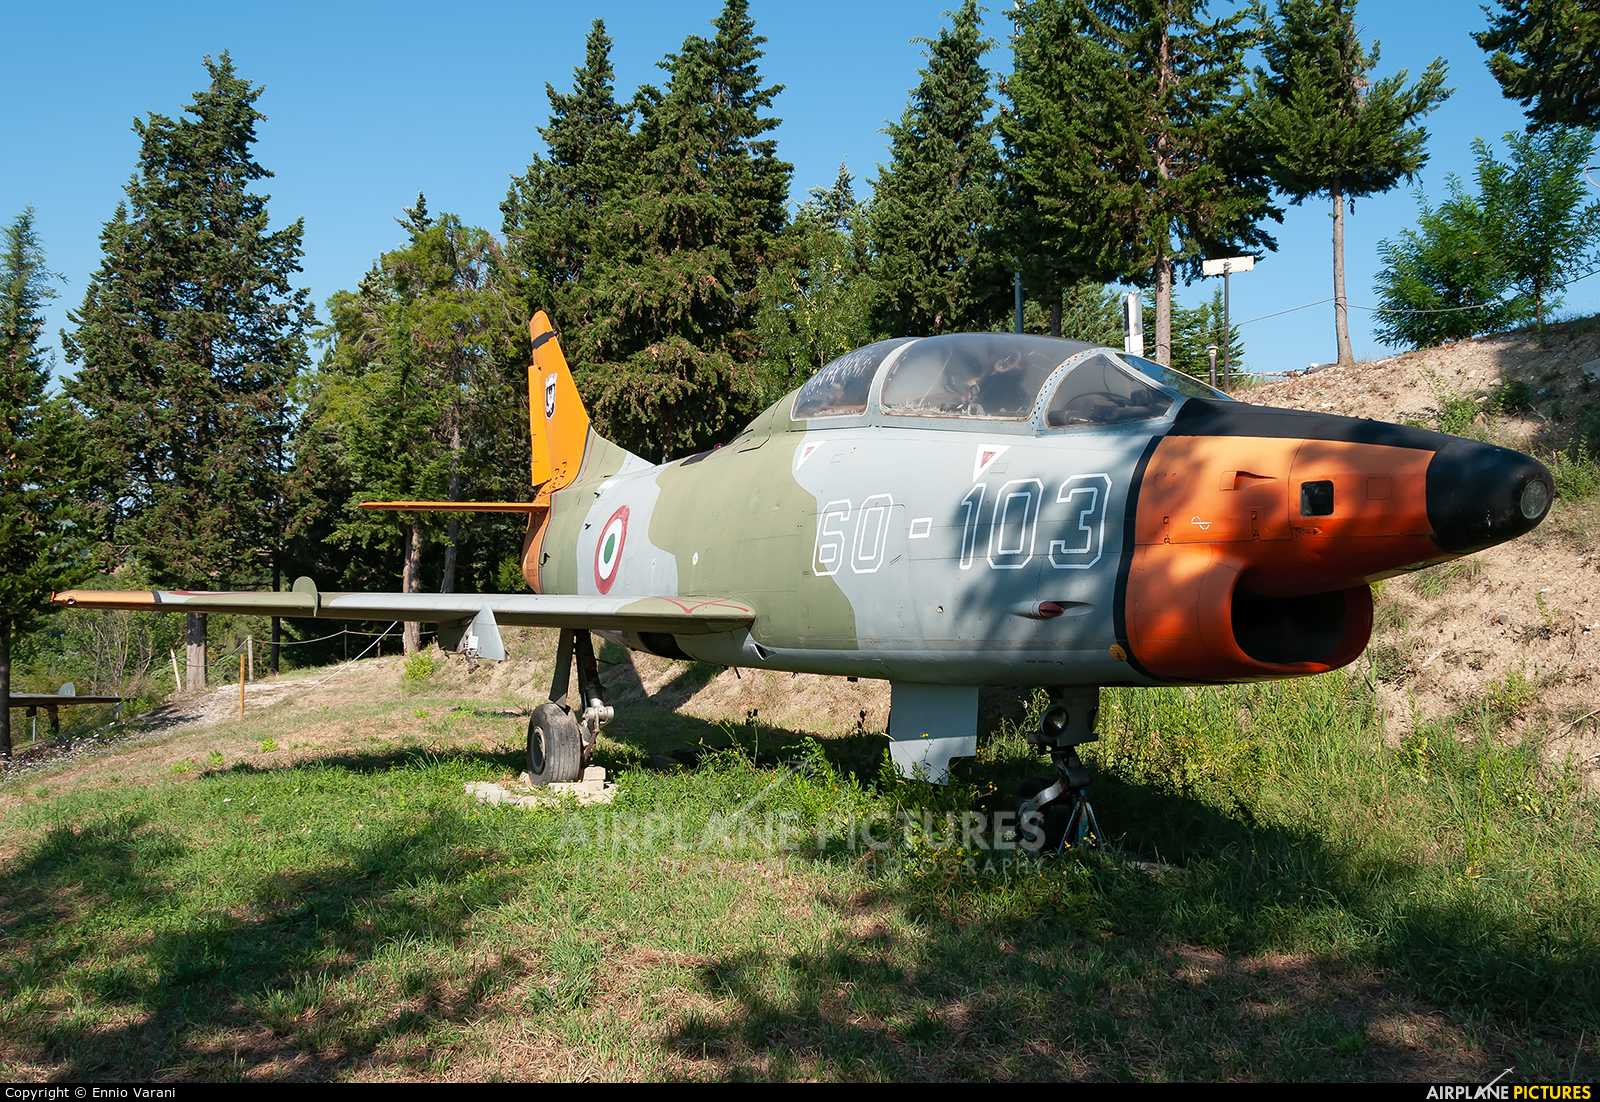 Italy - Air Force MM54403 aircraft at Cerbaiola Aviation Museum